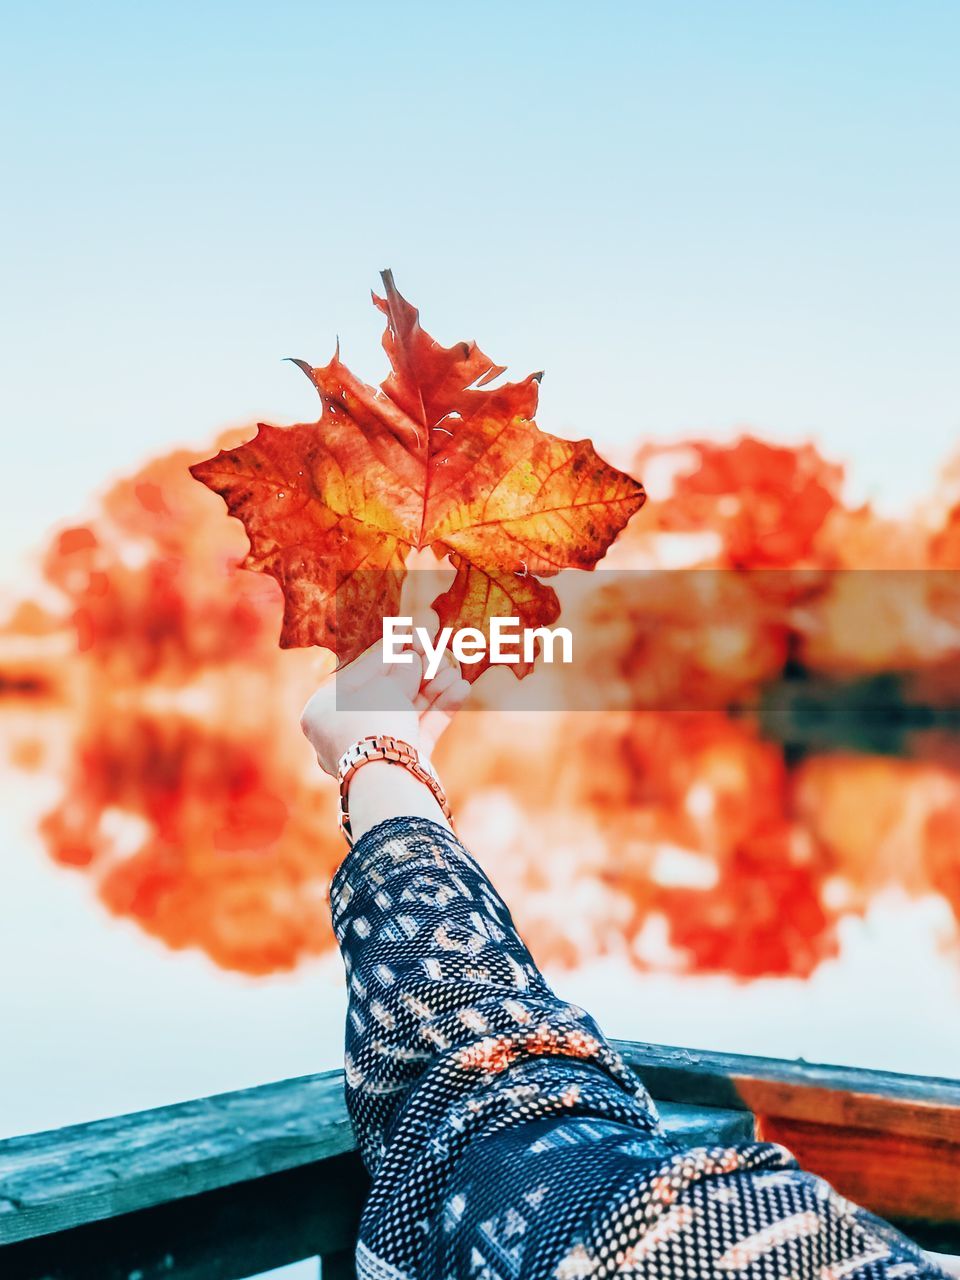 Cropped image of person holding orange maple leaf at lake against clear sky